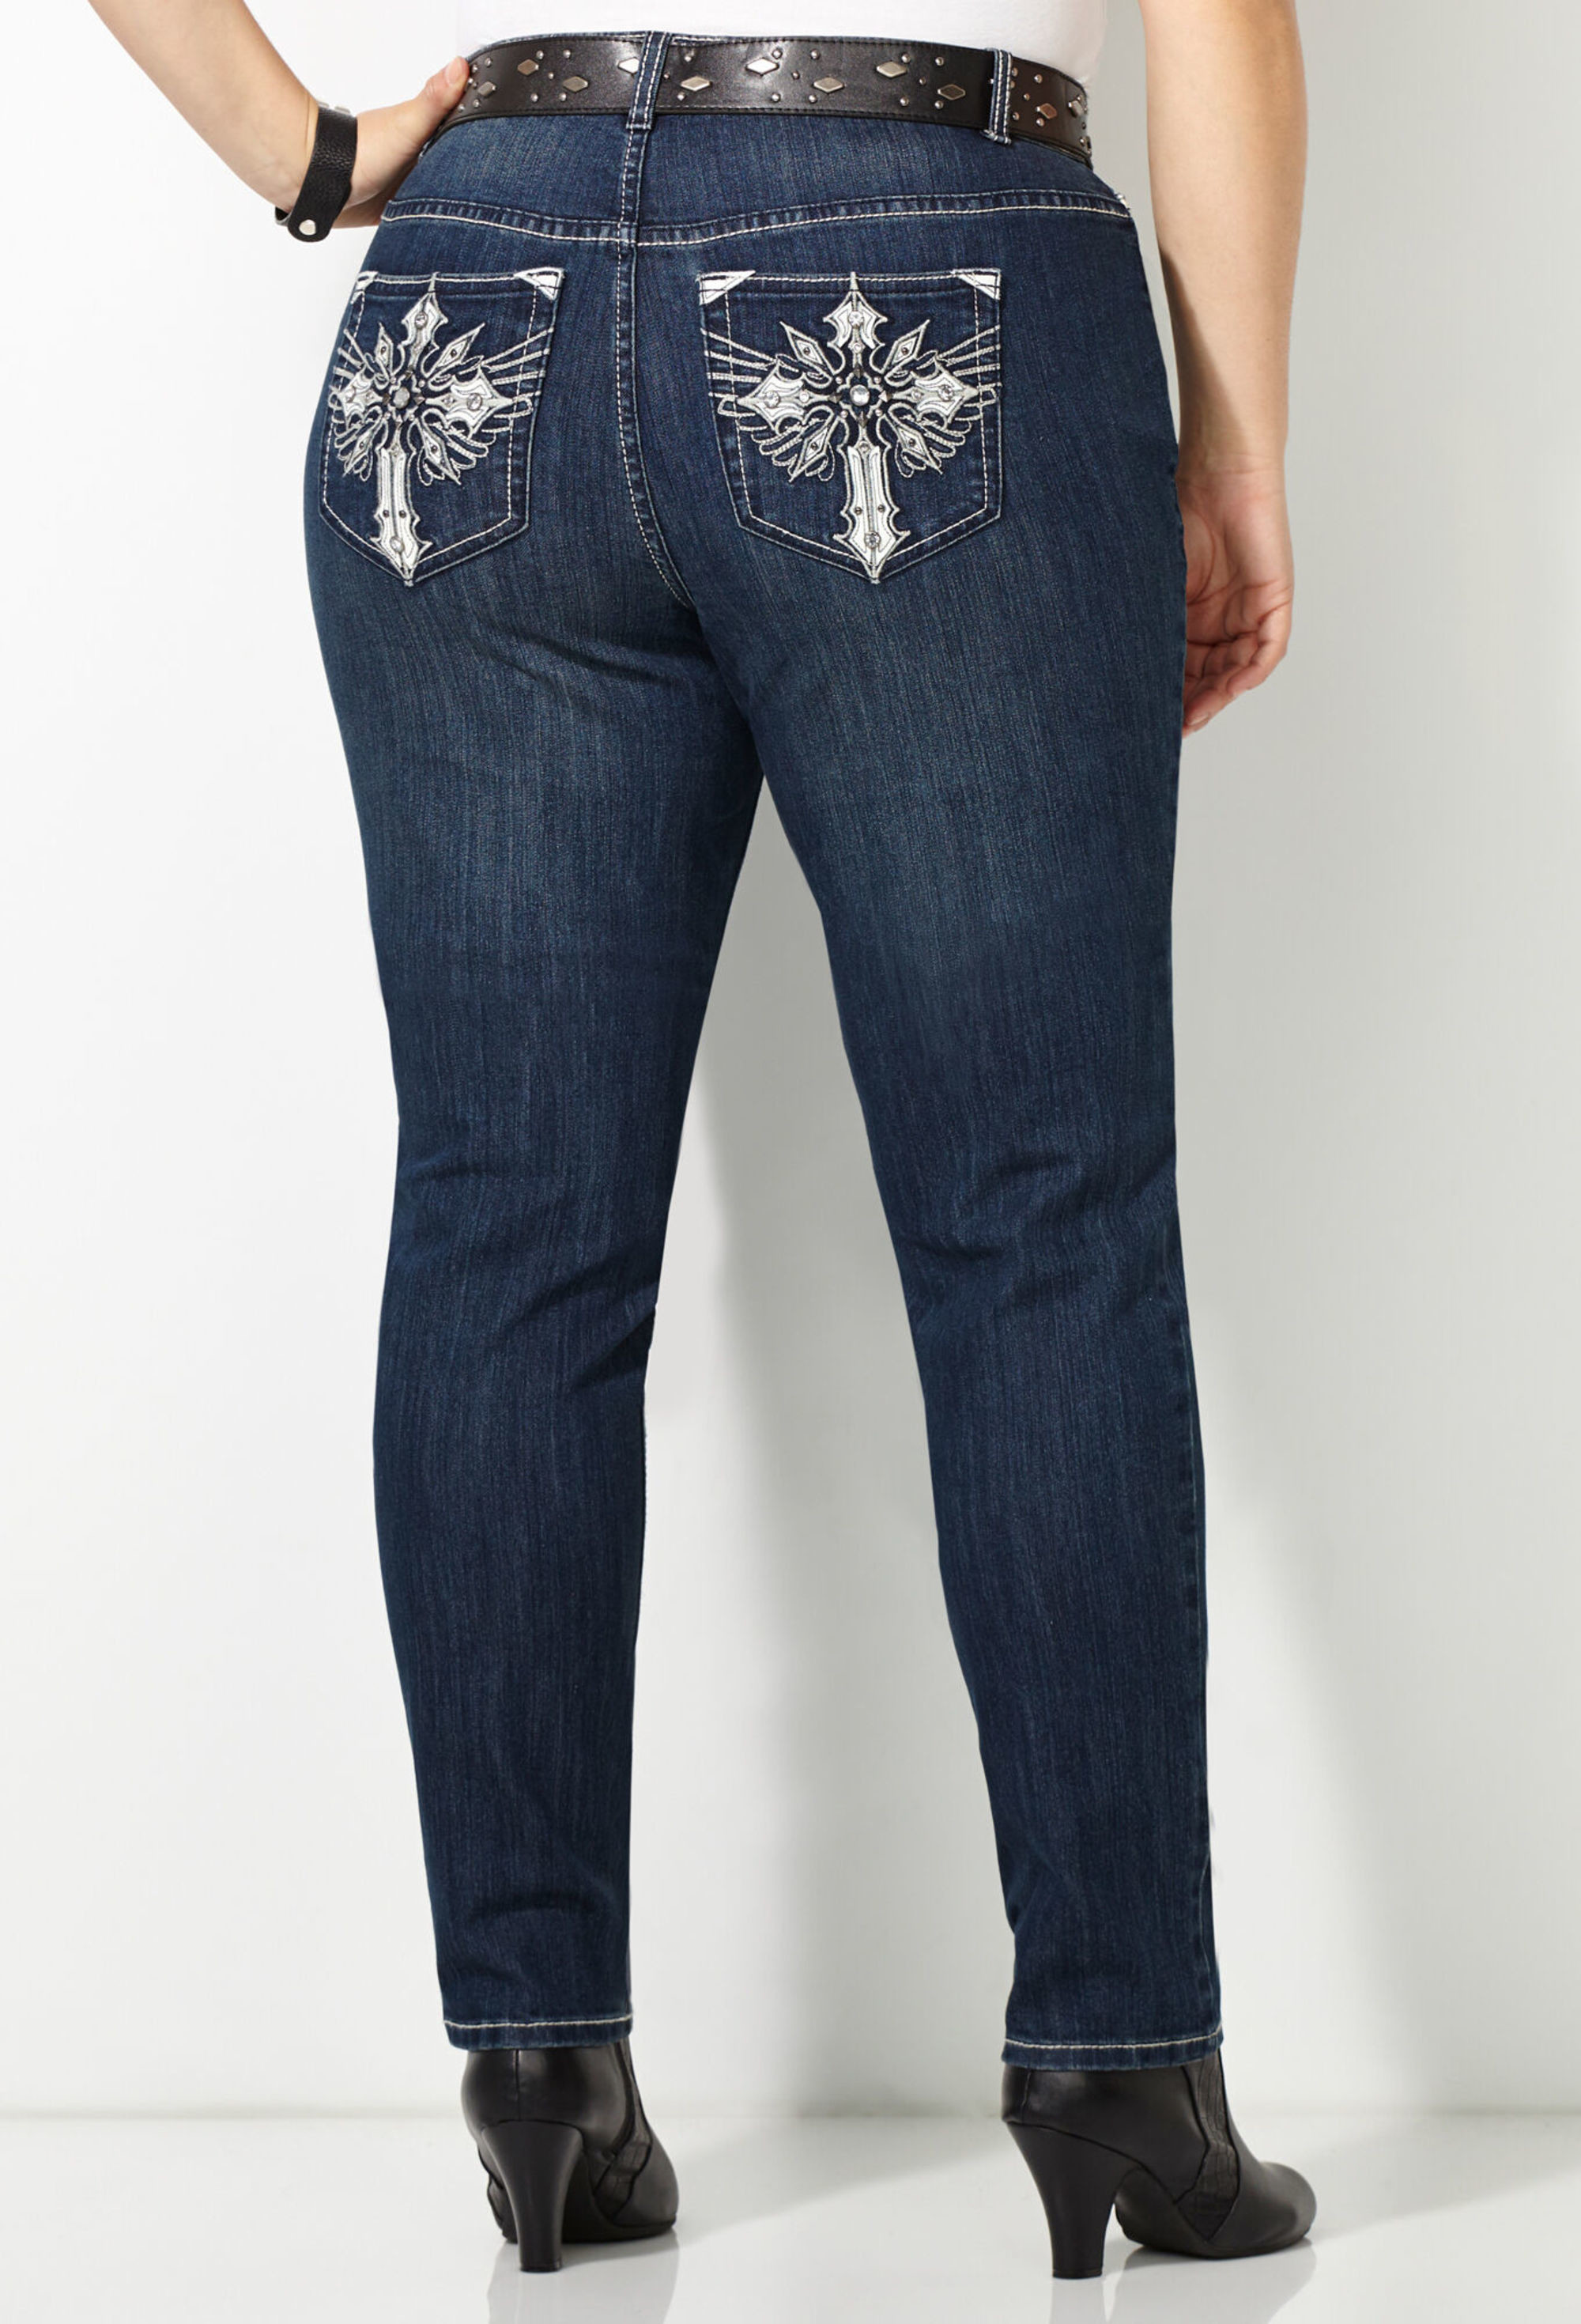 jeans with bling on back pockets